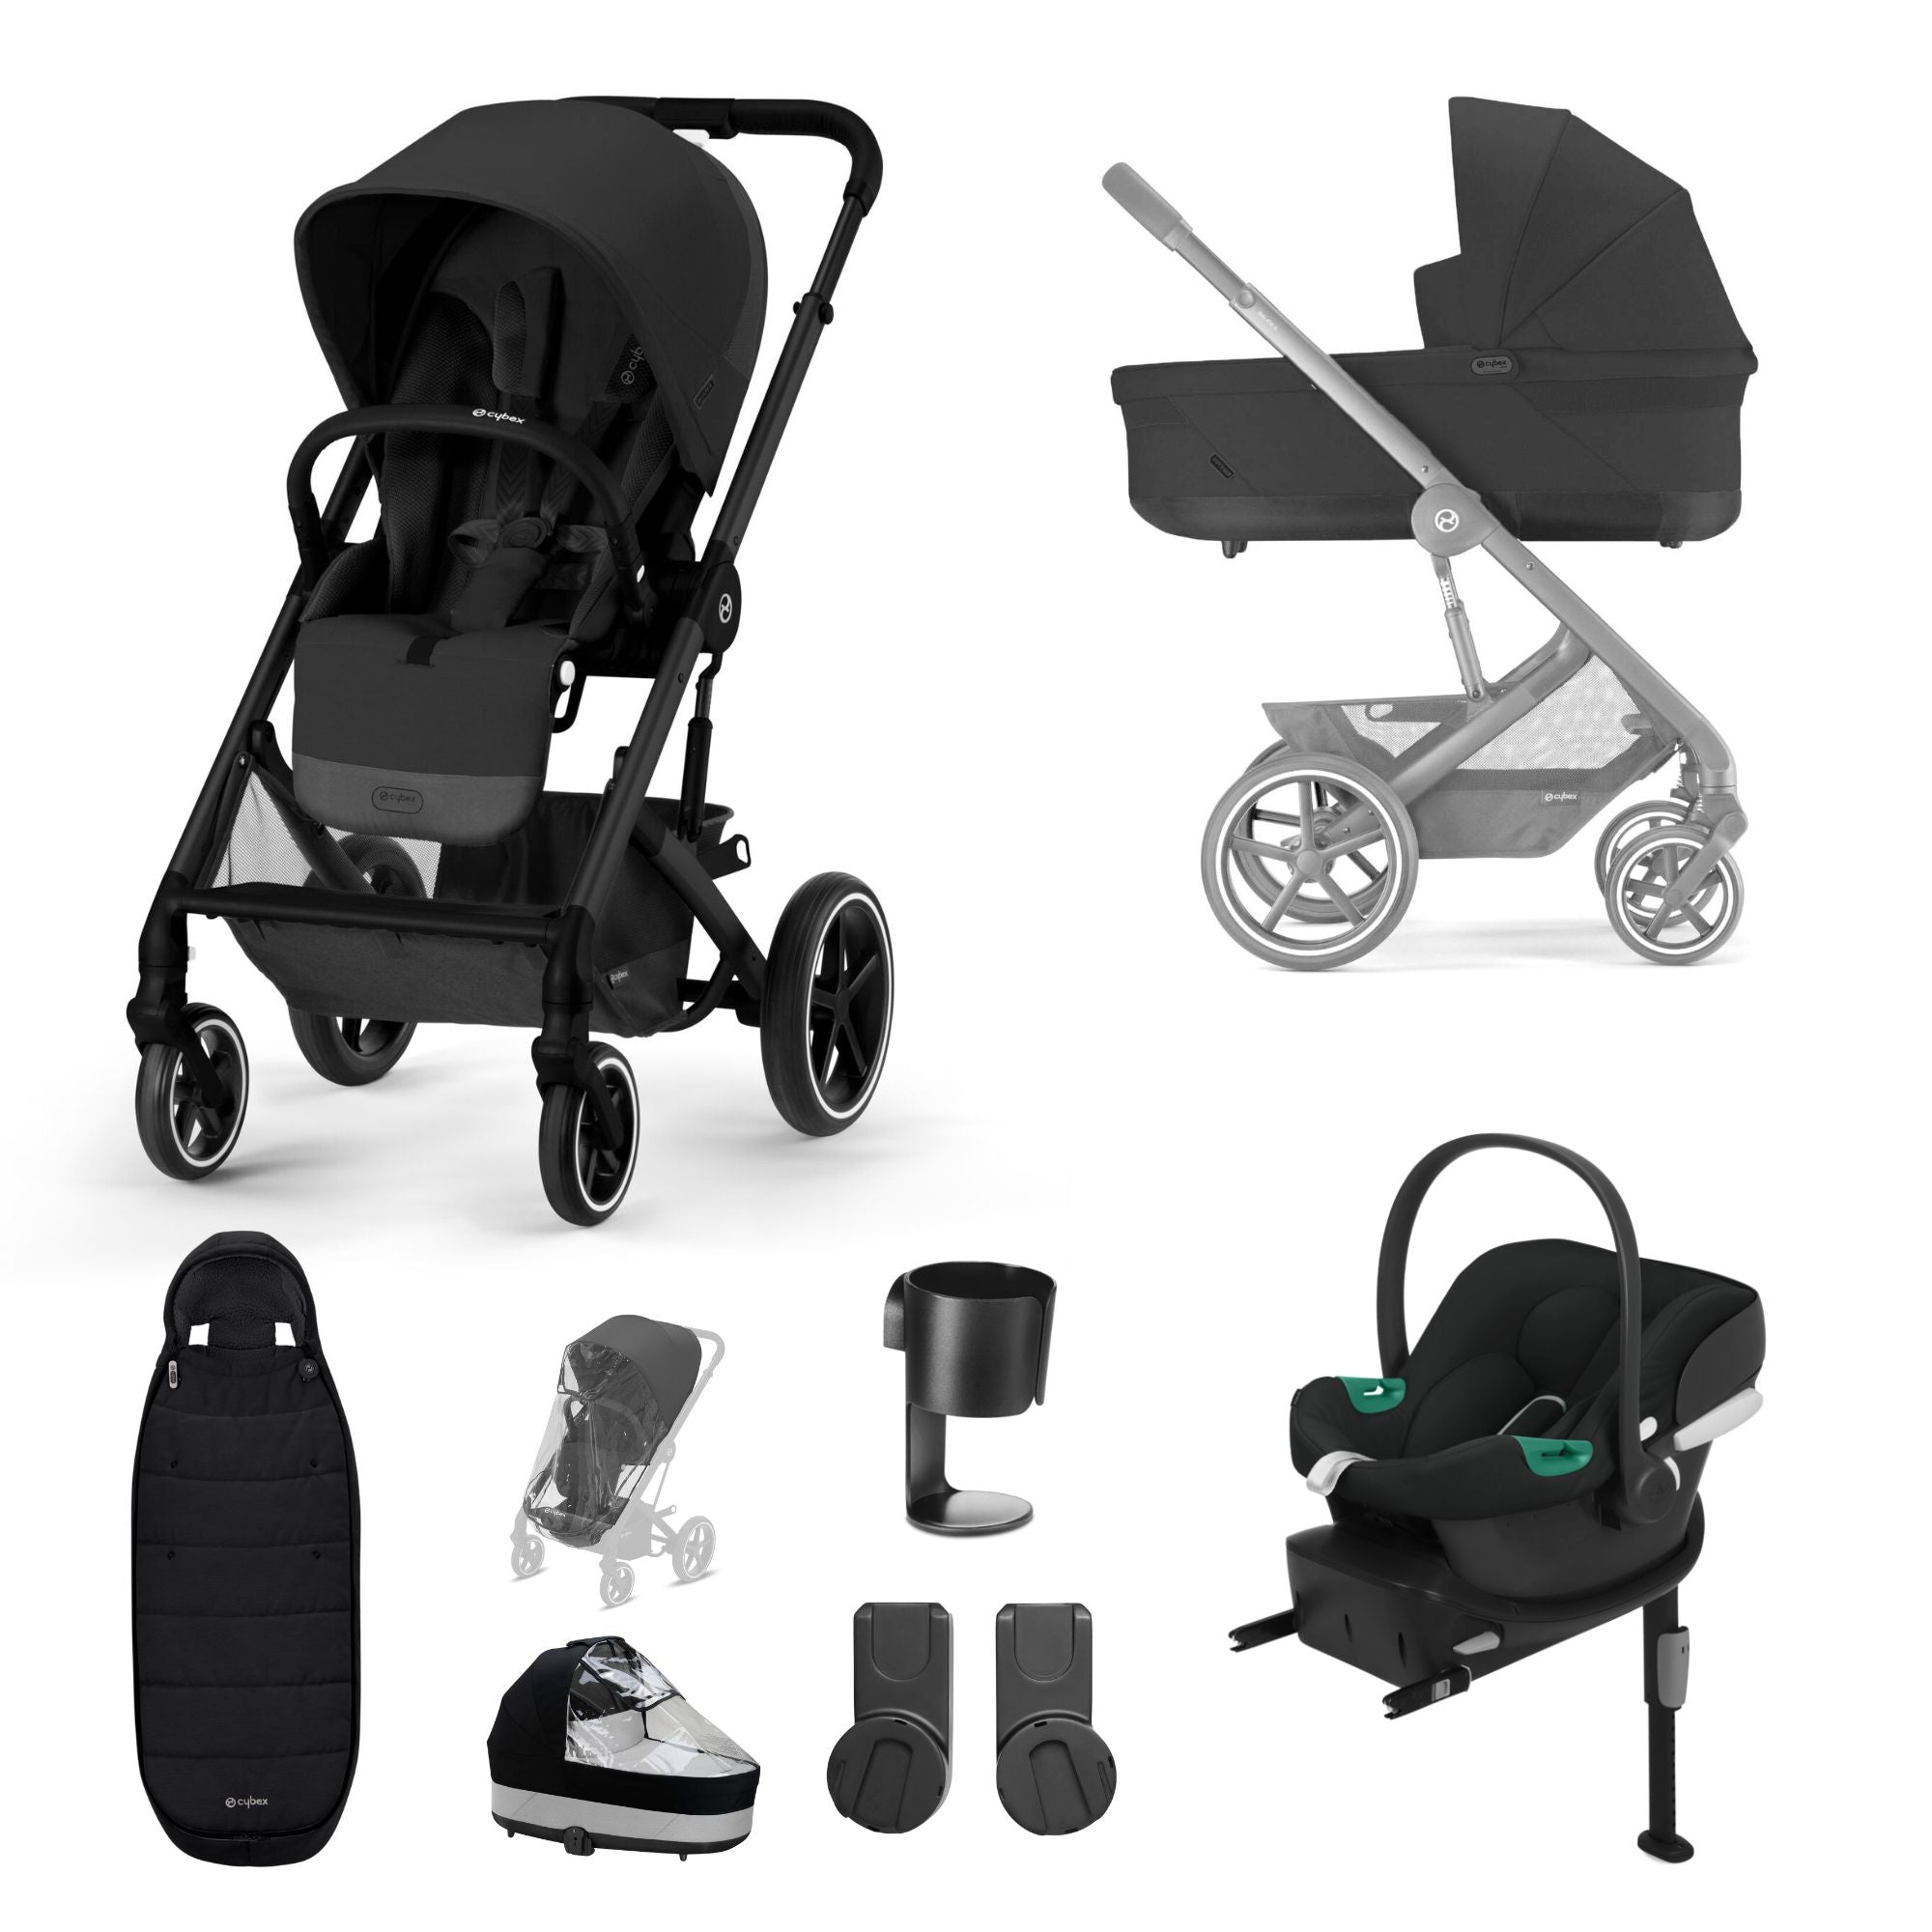 Cybex Balios S Lux Moon Black 10 Piece Bundle includes Aton B2 isize Carseat & Base